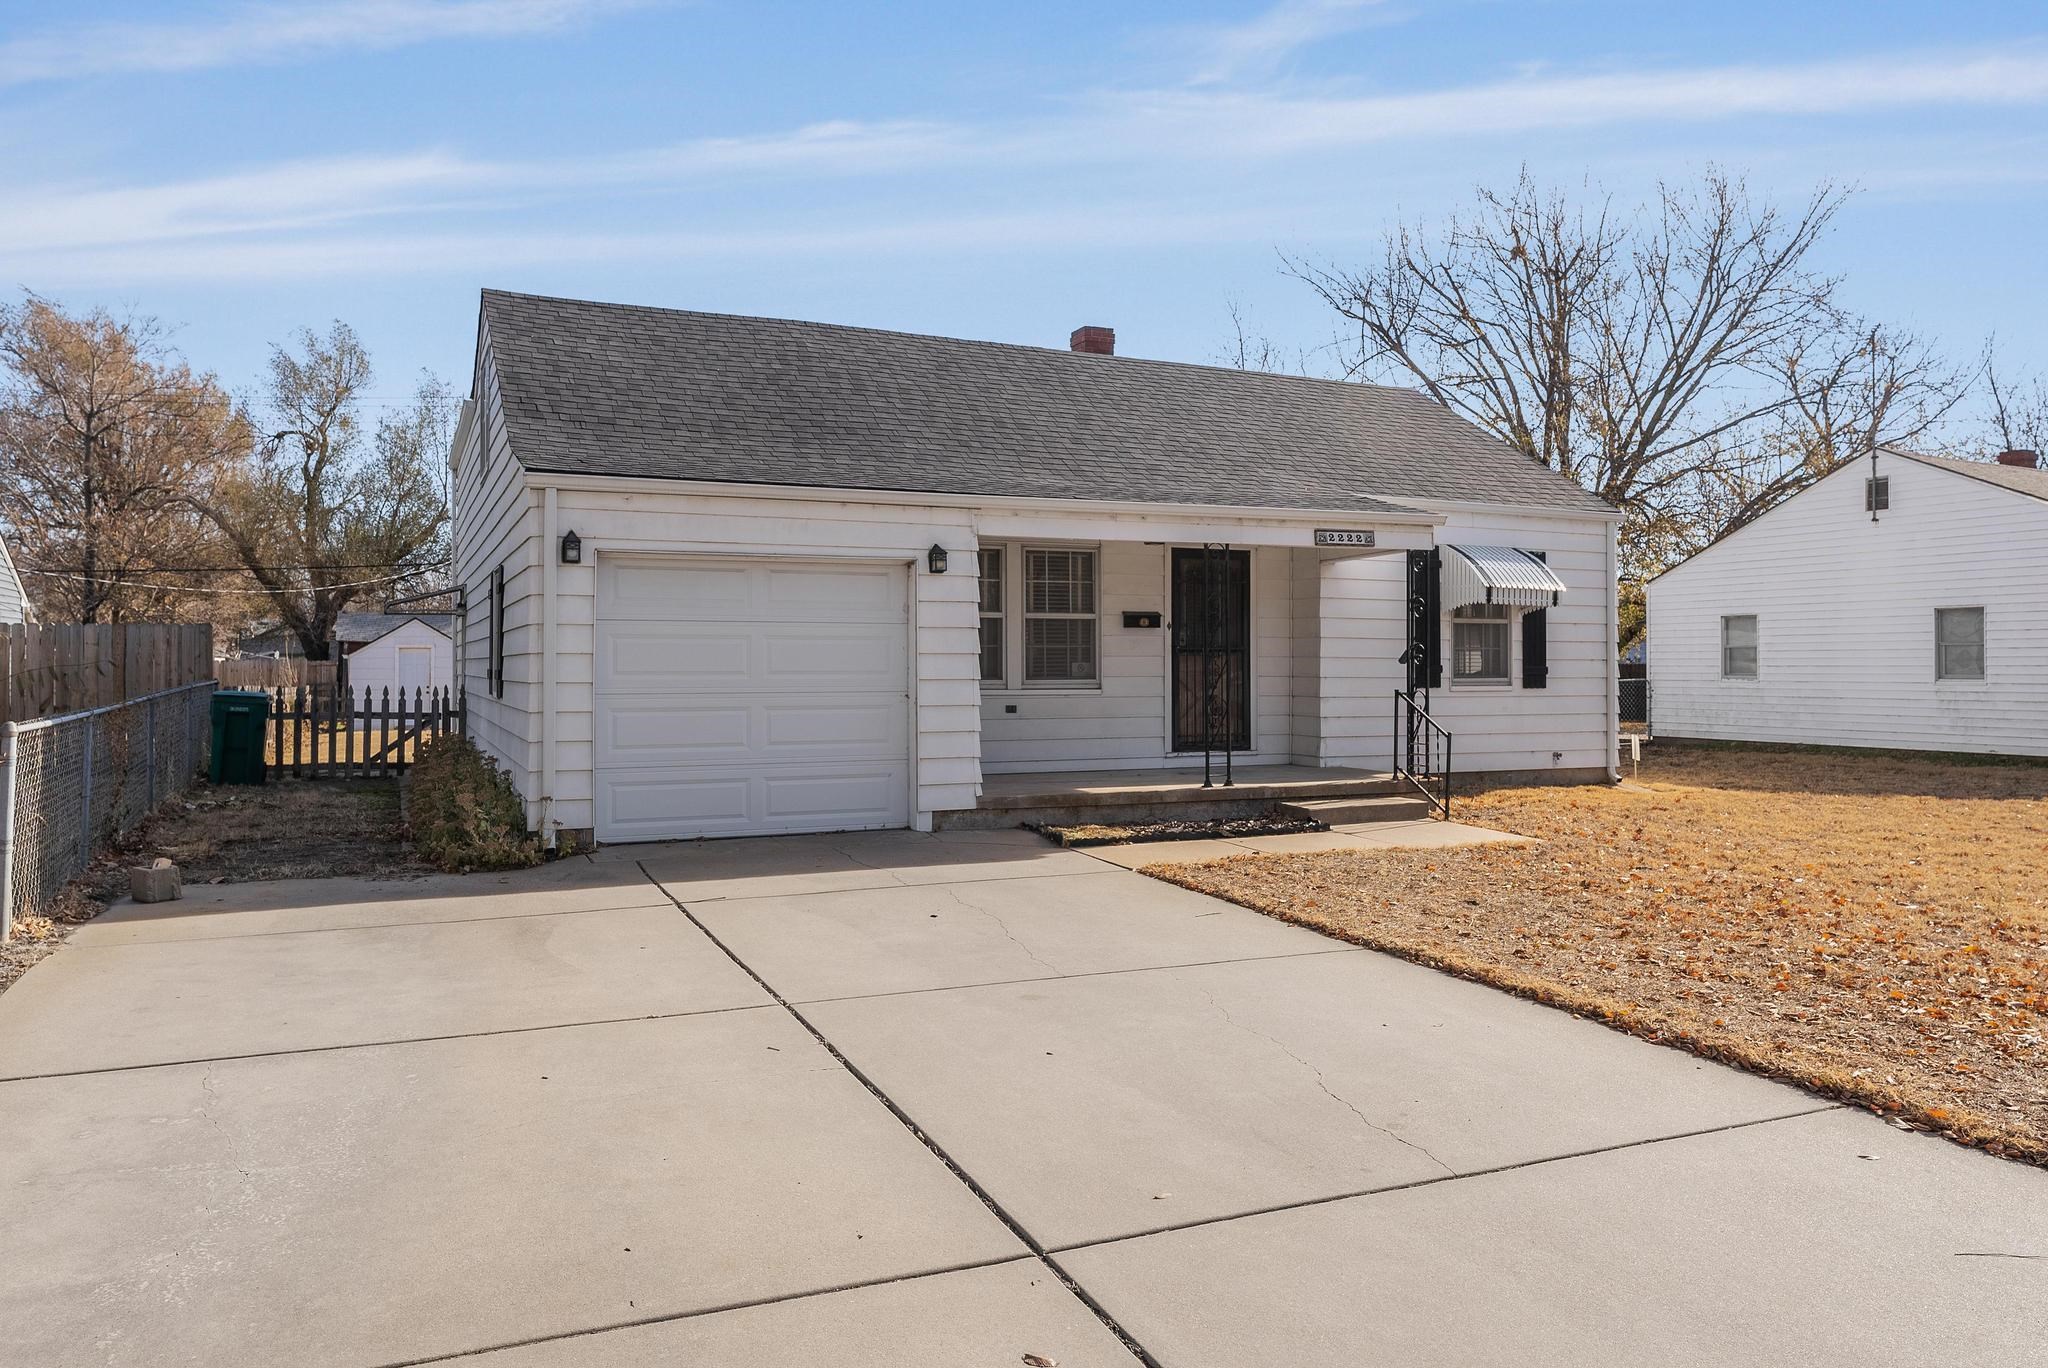 You don't want to miss this little gem in South Wichita! This home has been lovingly maintained by t